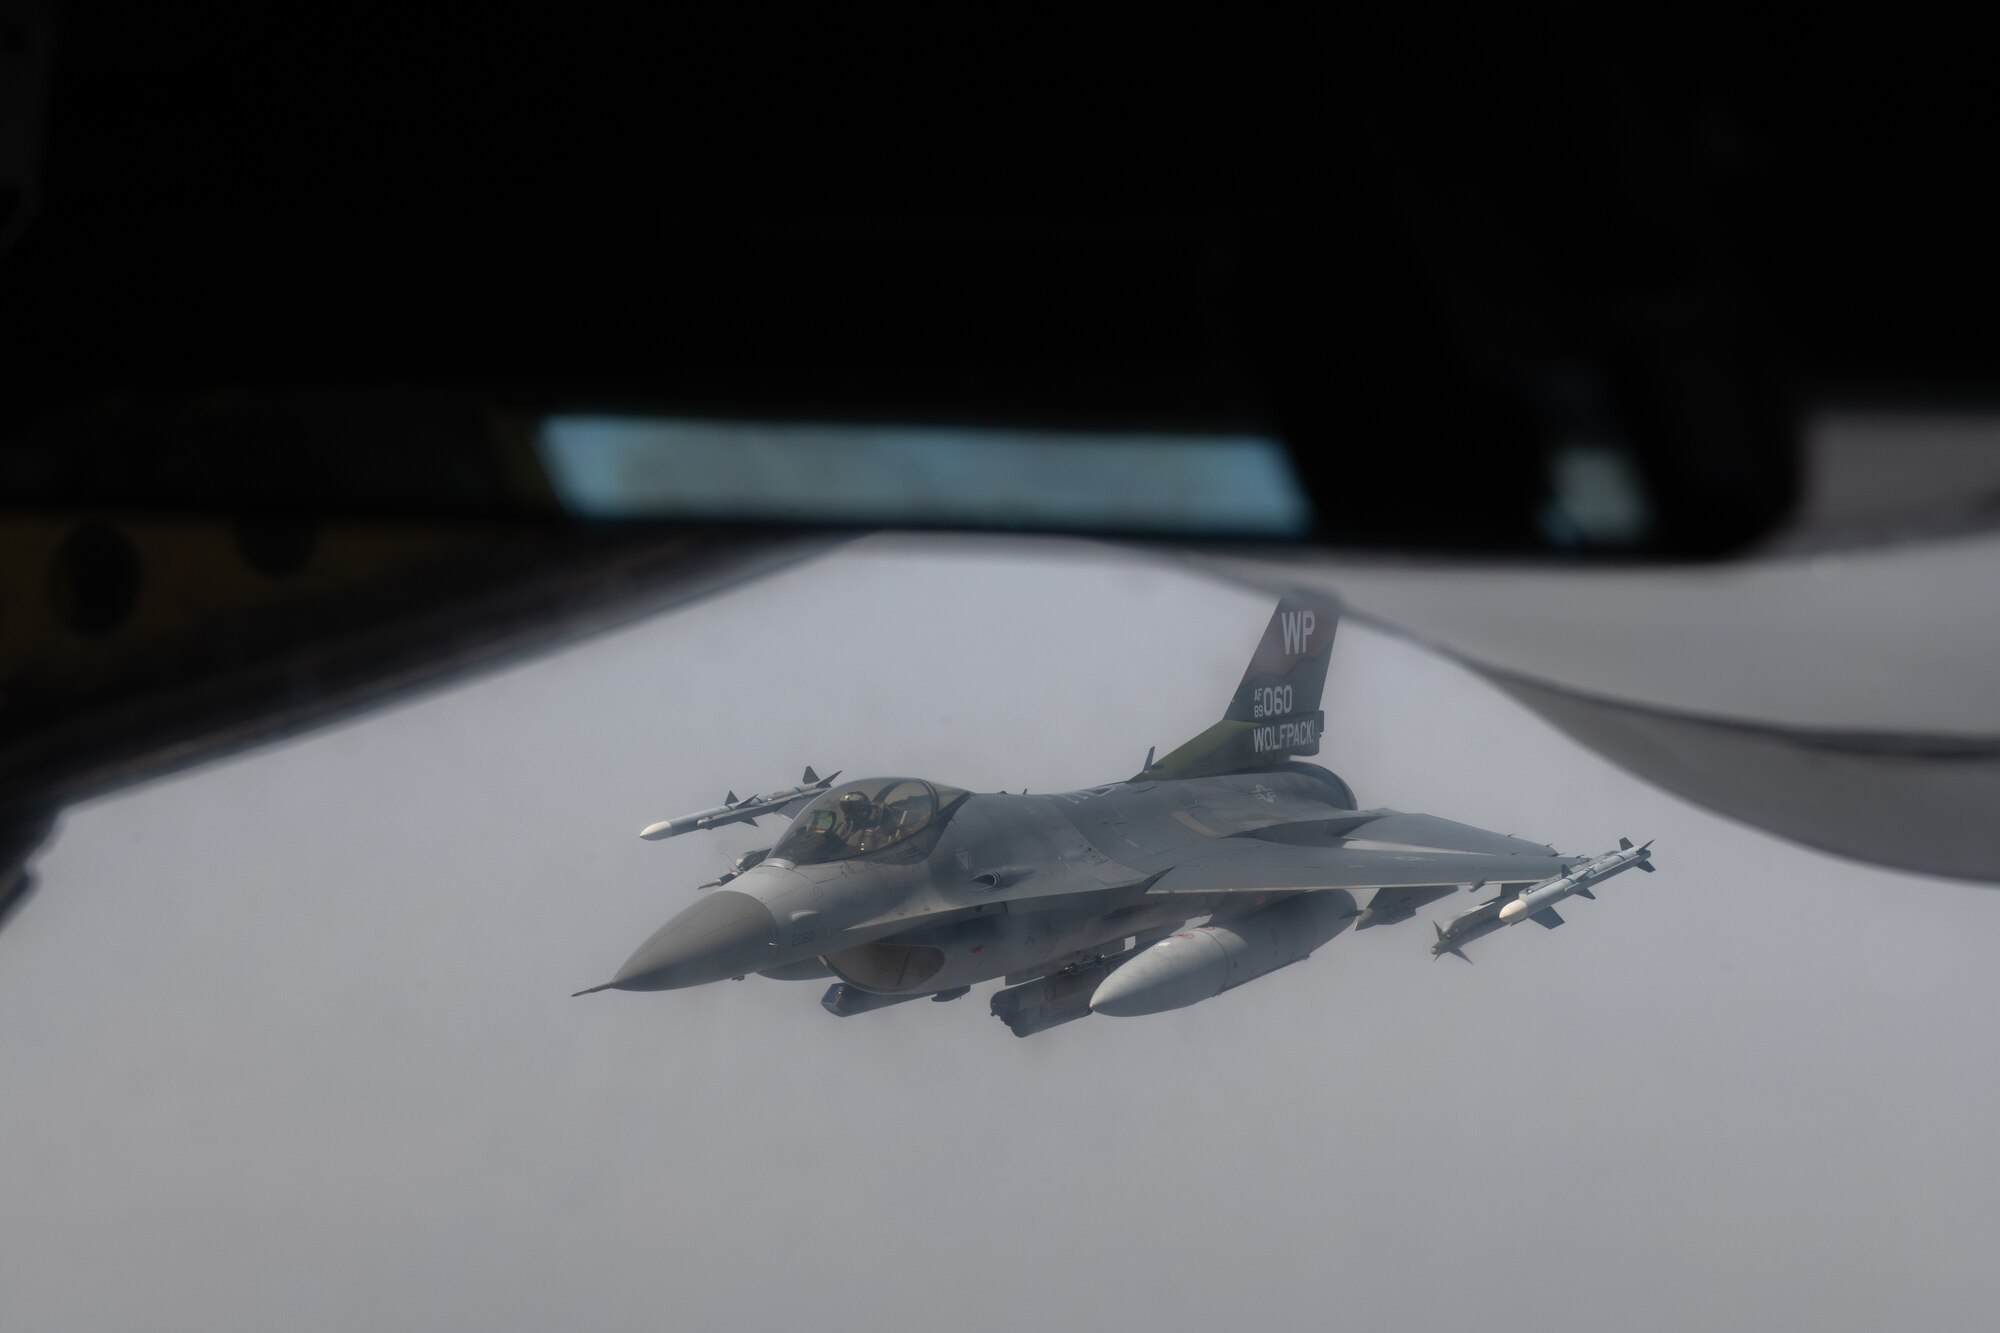 A U.S. Air Force F-16 Fighting Falcon pulls away from a KC-135 Stratotanker after refueling during Korea Flight Training Apr. 21, 2023. KFT is a regularly scheduled training event designed to enhance the combat readiness of U.S. and Republic of Korea forces to maintain peace in the region. (U.S. Air Force photo by Senior Airman Cedrique Oldaker)